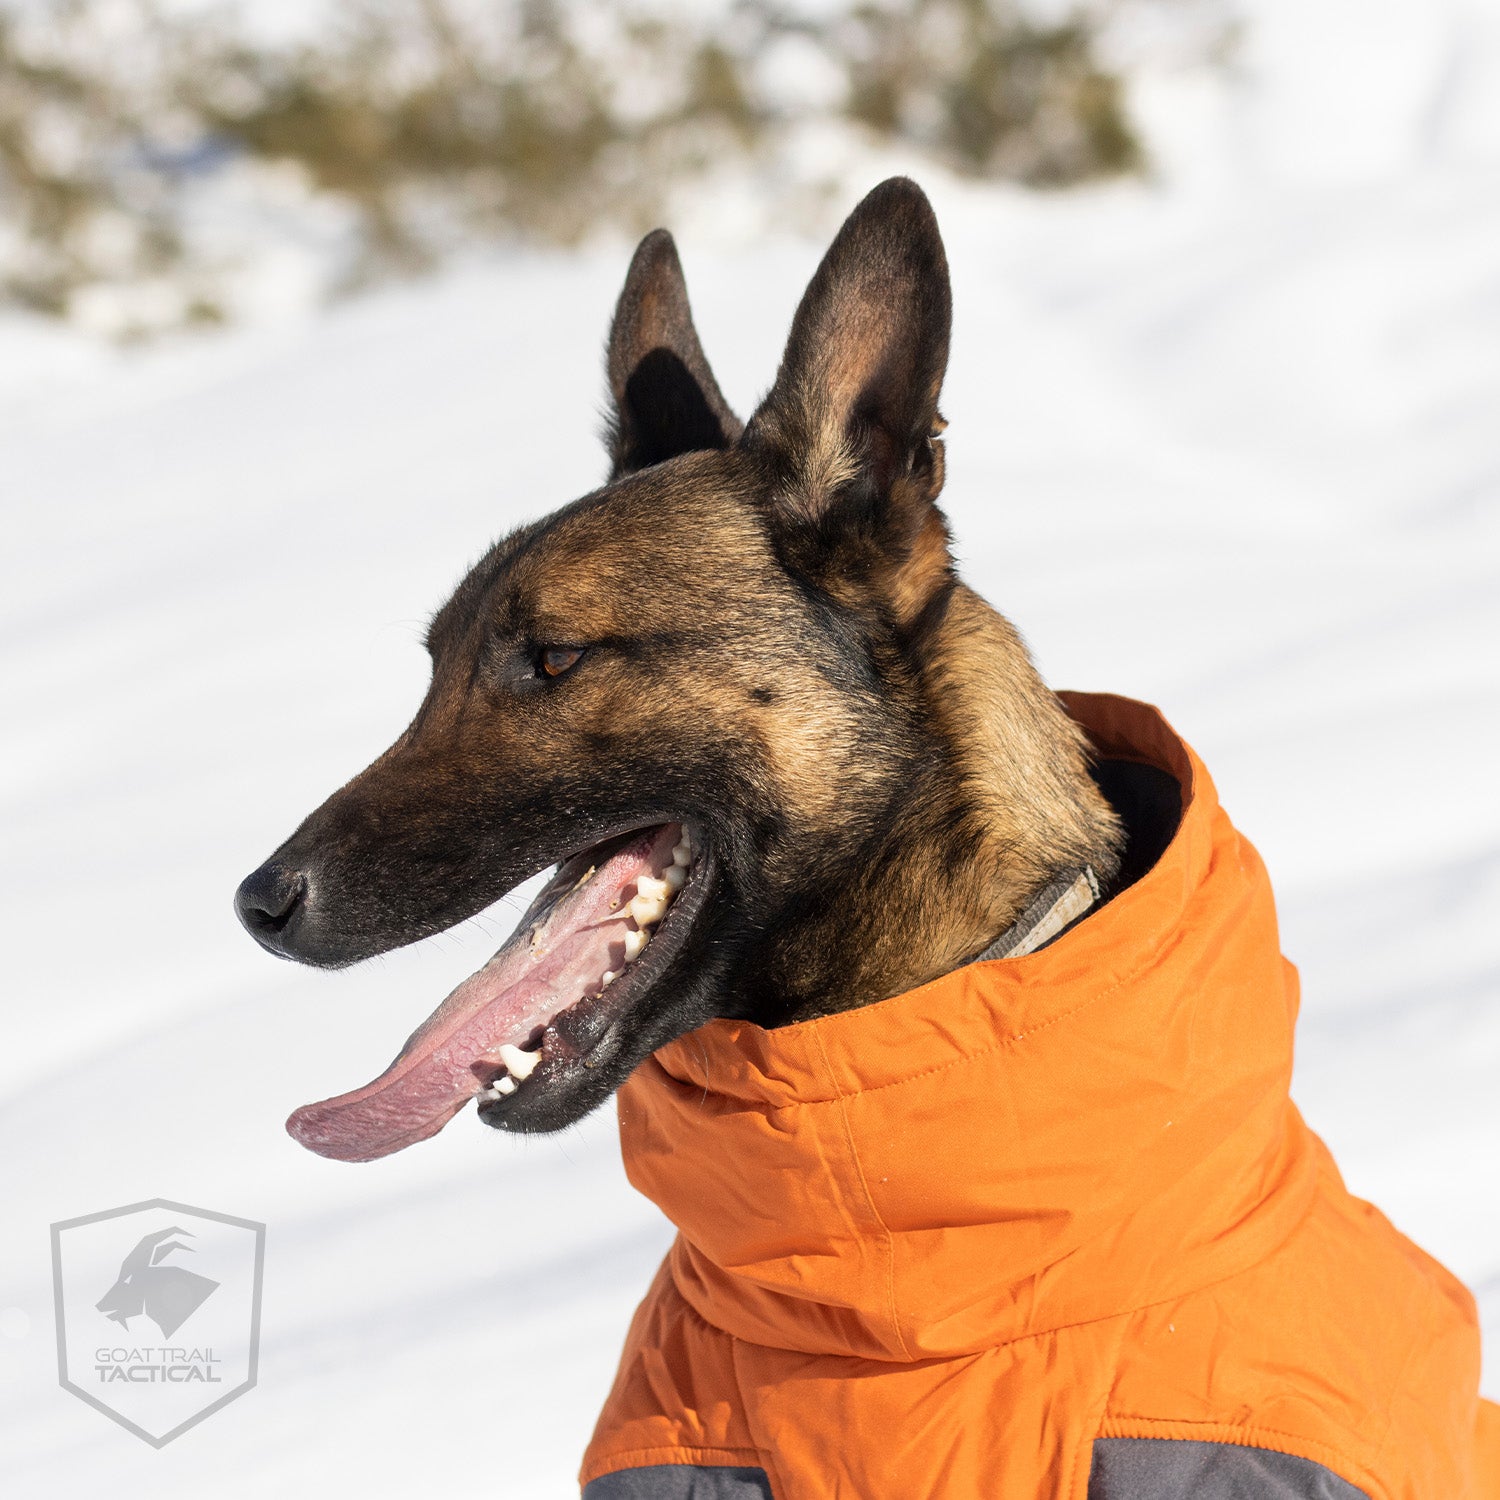 How Can I Keep My Dog Warm During the Cold Winter Months?